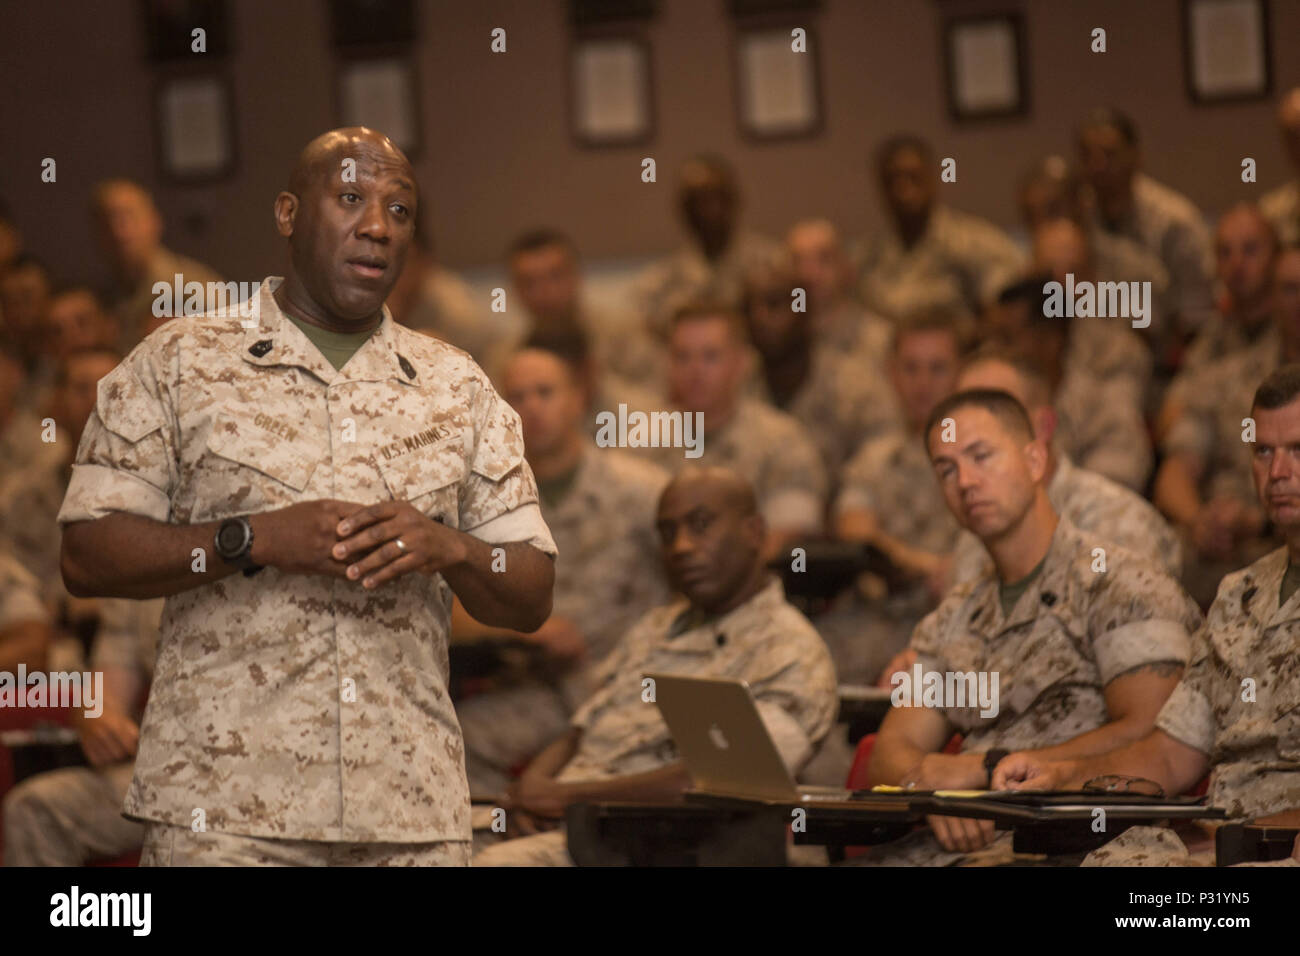 The 18th Sergeant Major of the Marine Corps, Ronald L. Green, visits Marines and support personnel assigned to Marine Corps Base Camp Pendleton, CA., Aug 17, 2016. (U.S. Marine Corps photo by Sgt. Melissa Marnell, Office of the Sergeant Major of the Marine Corps/Released) Stock Photo